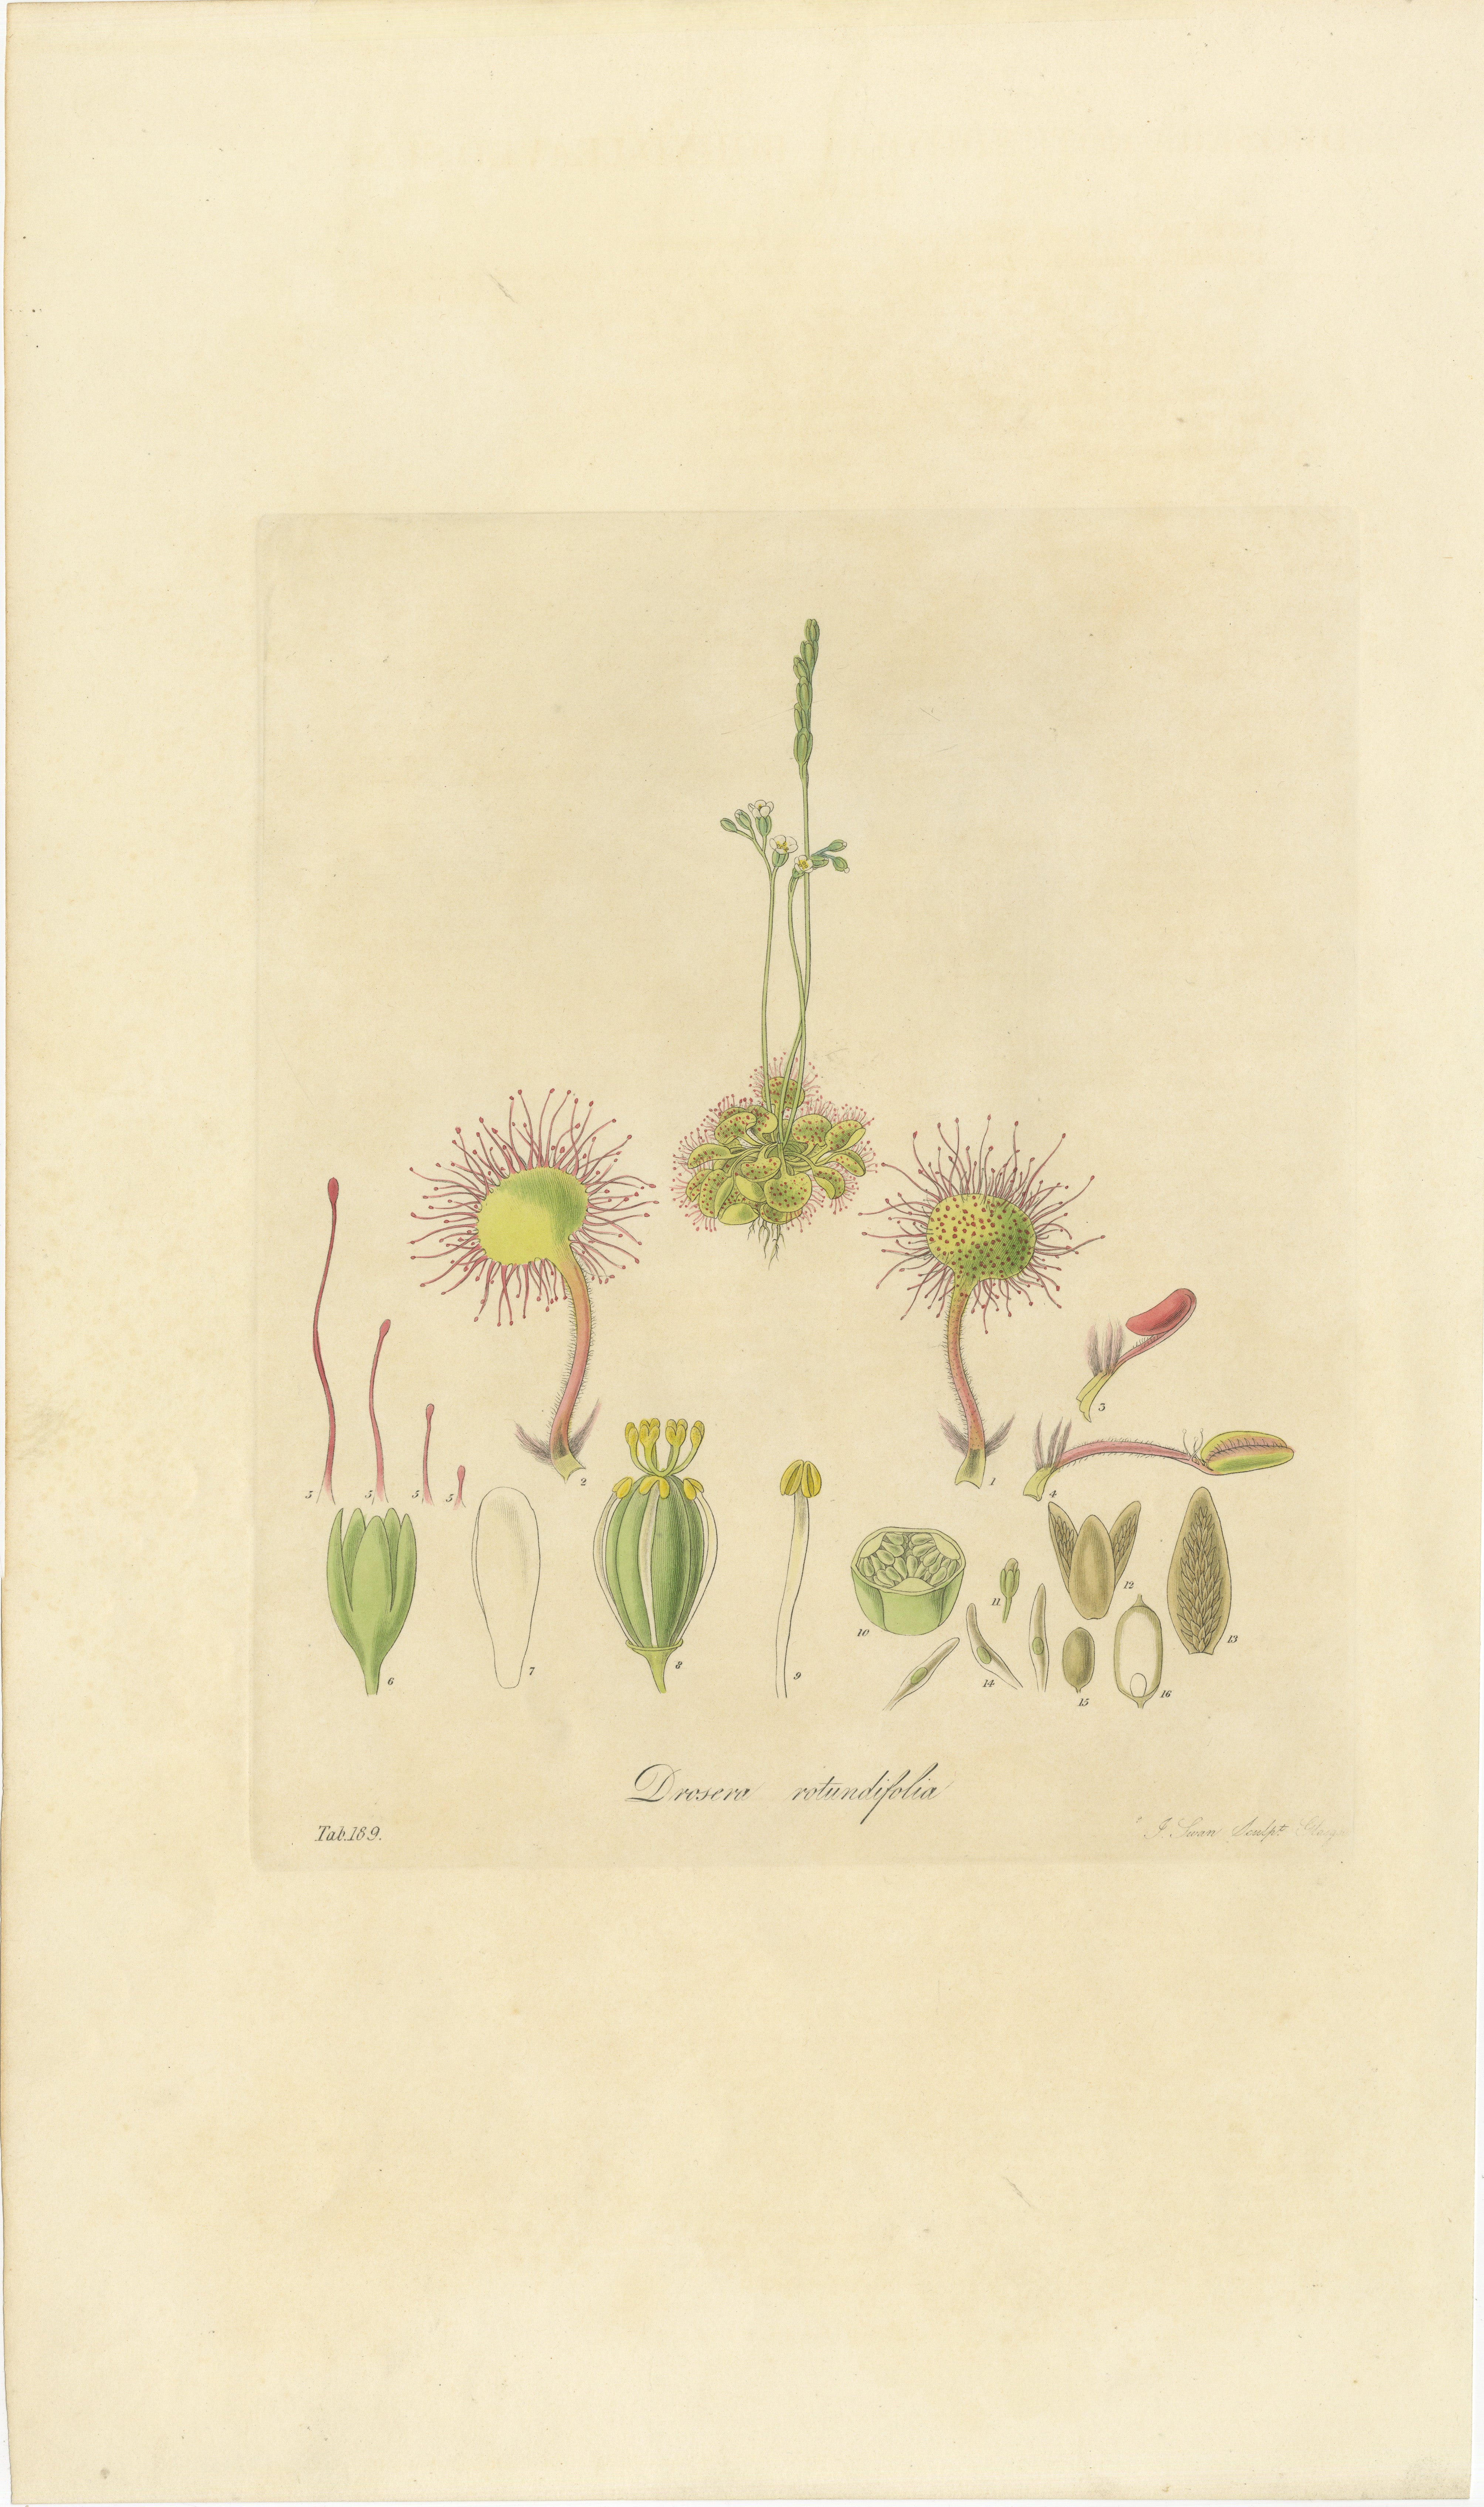 The plant depicted in the illustration is identified as 